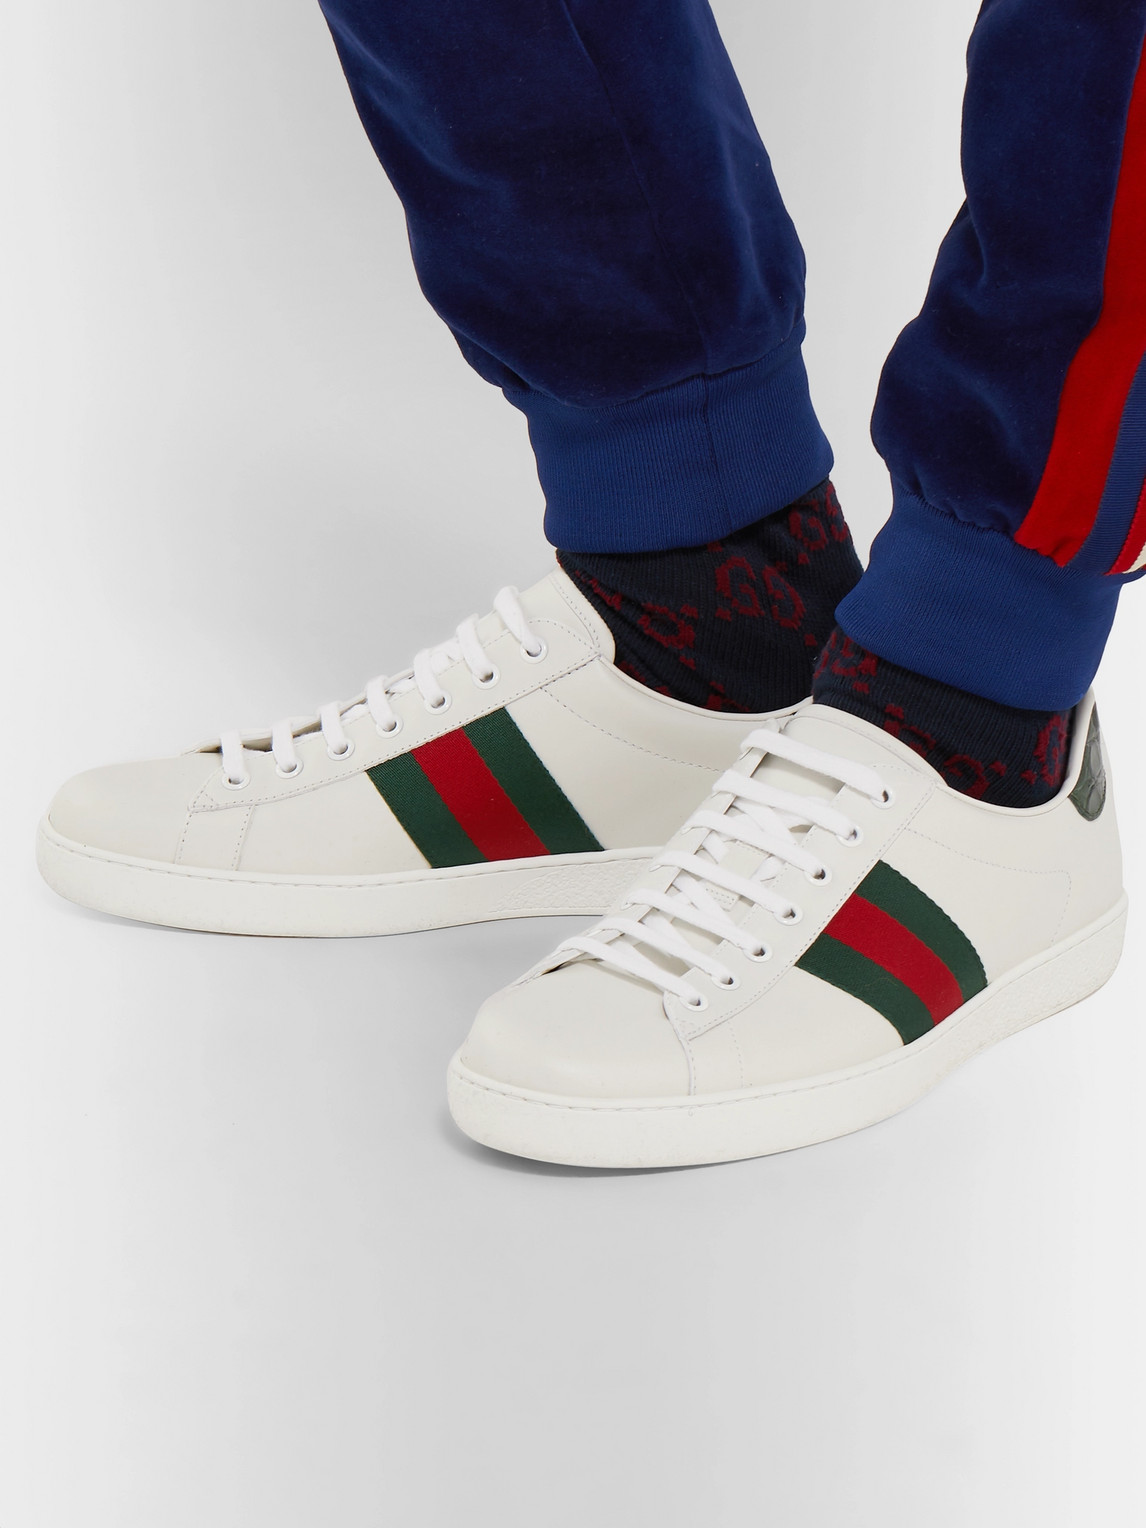 Gucci Low-Top Sneakers New Ace Sneaker Calfskin Striped Green Red White ...